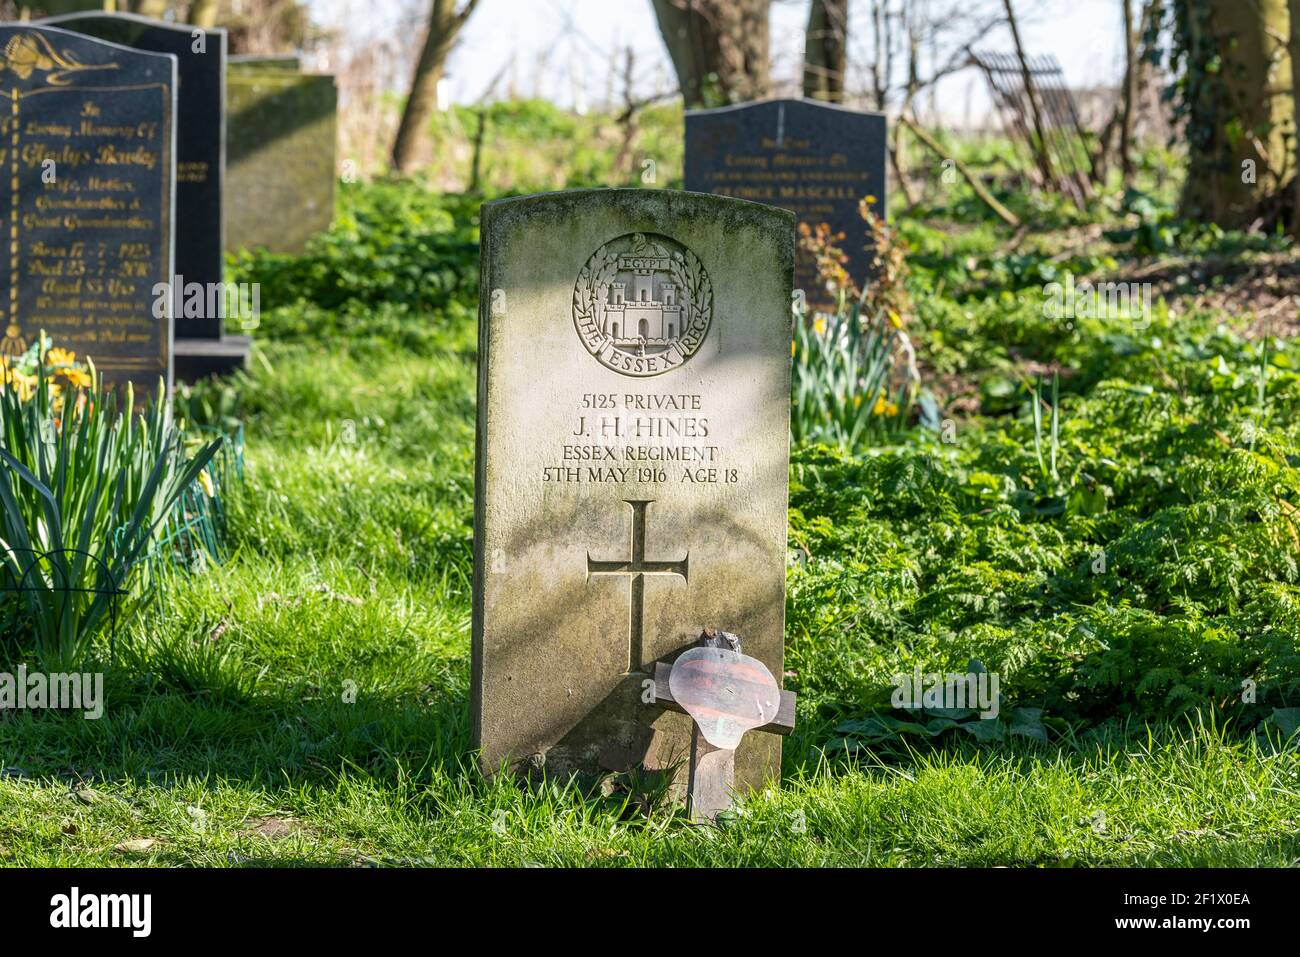 Military headstone in St Mary & All Saints church churchyard, Stambridge, Essex, UK. Private JH Hines, The Essex Regiment, British Army. Died 1916 Stock Photo